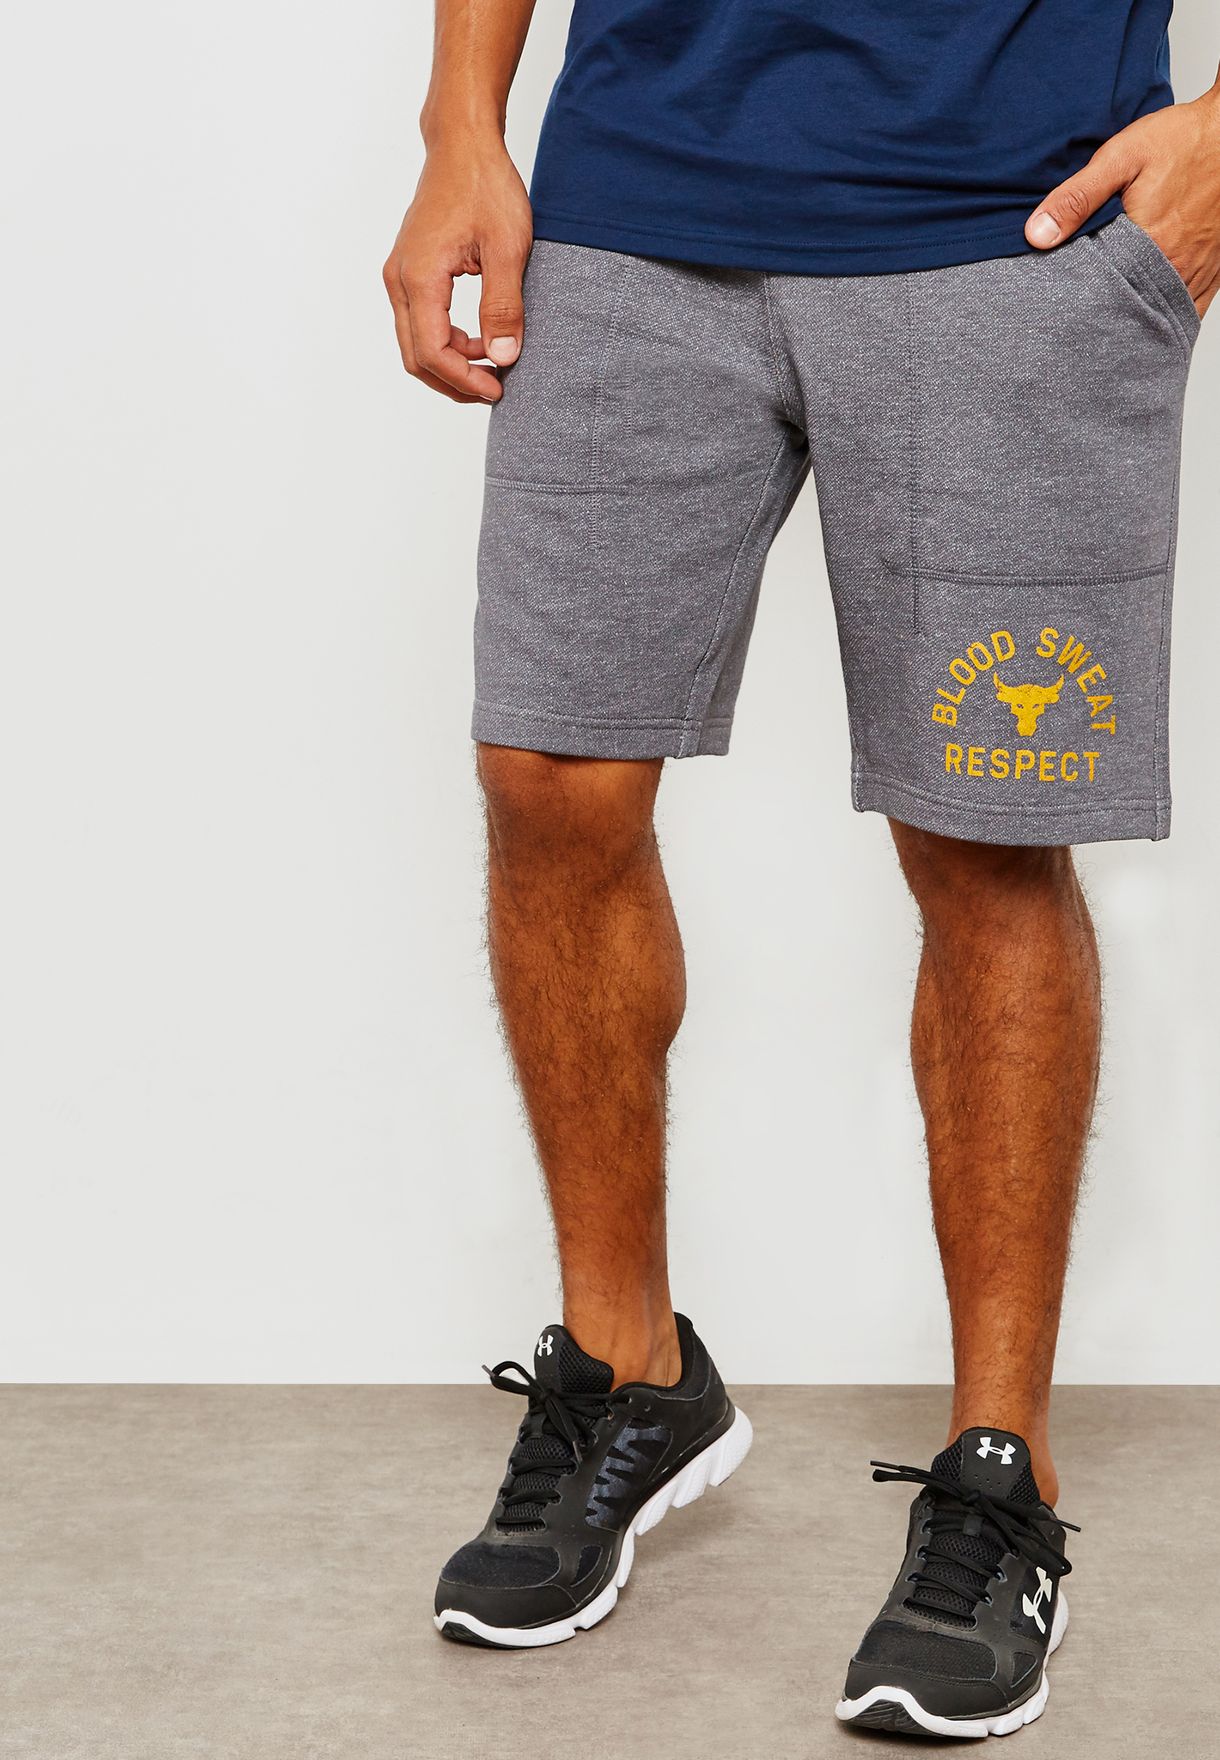 Project Rock Respect Shorts for Men 